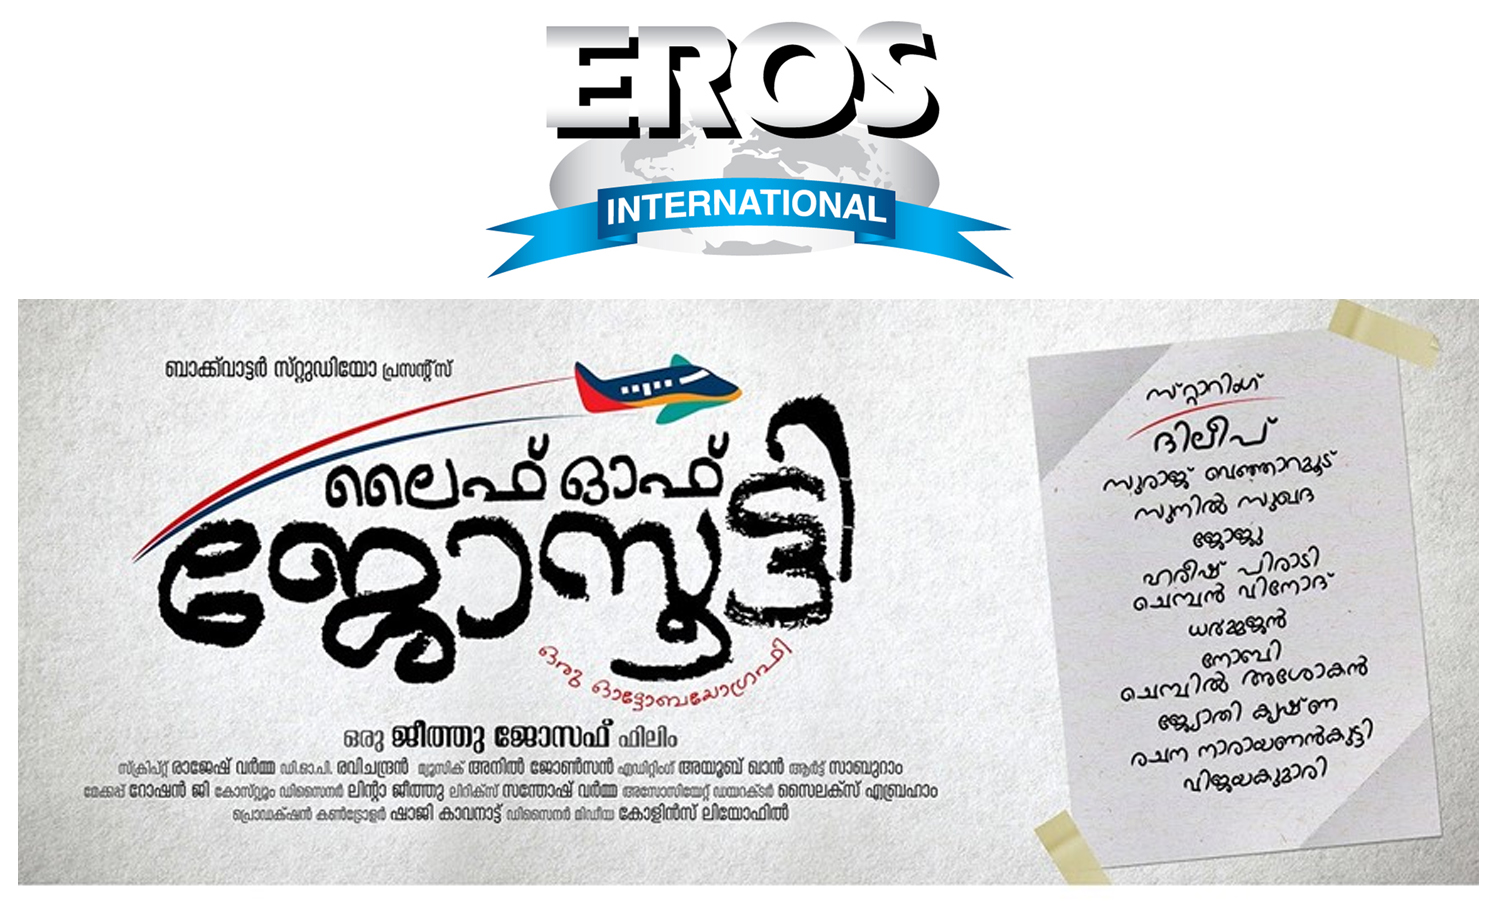 Eros International to link up with a Malayalam movie-Life of josootty-Dileep-Jeethu Joseph-Onlookers Media